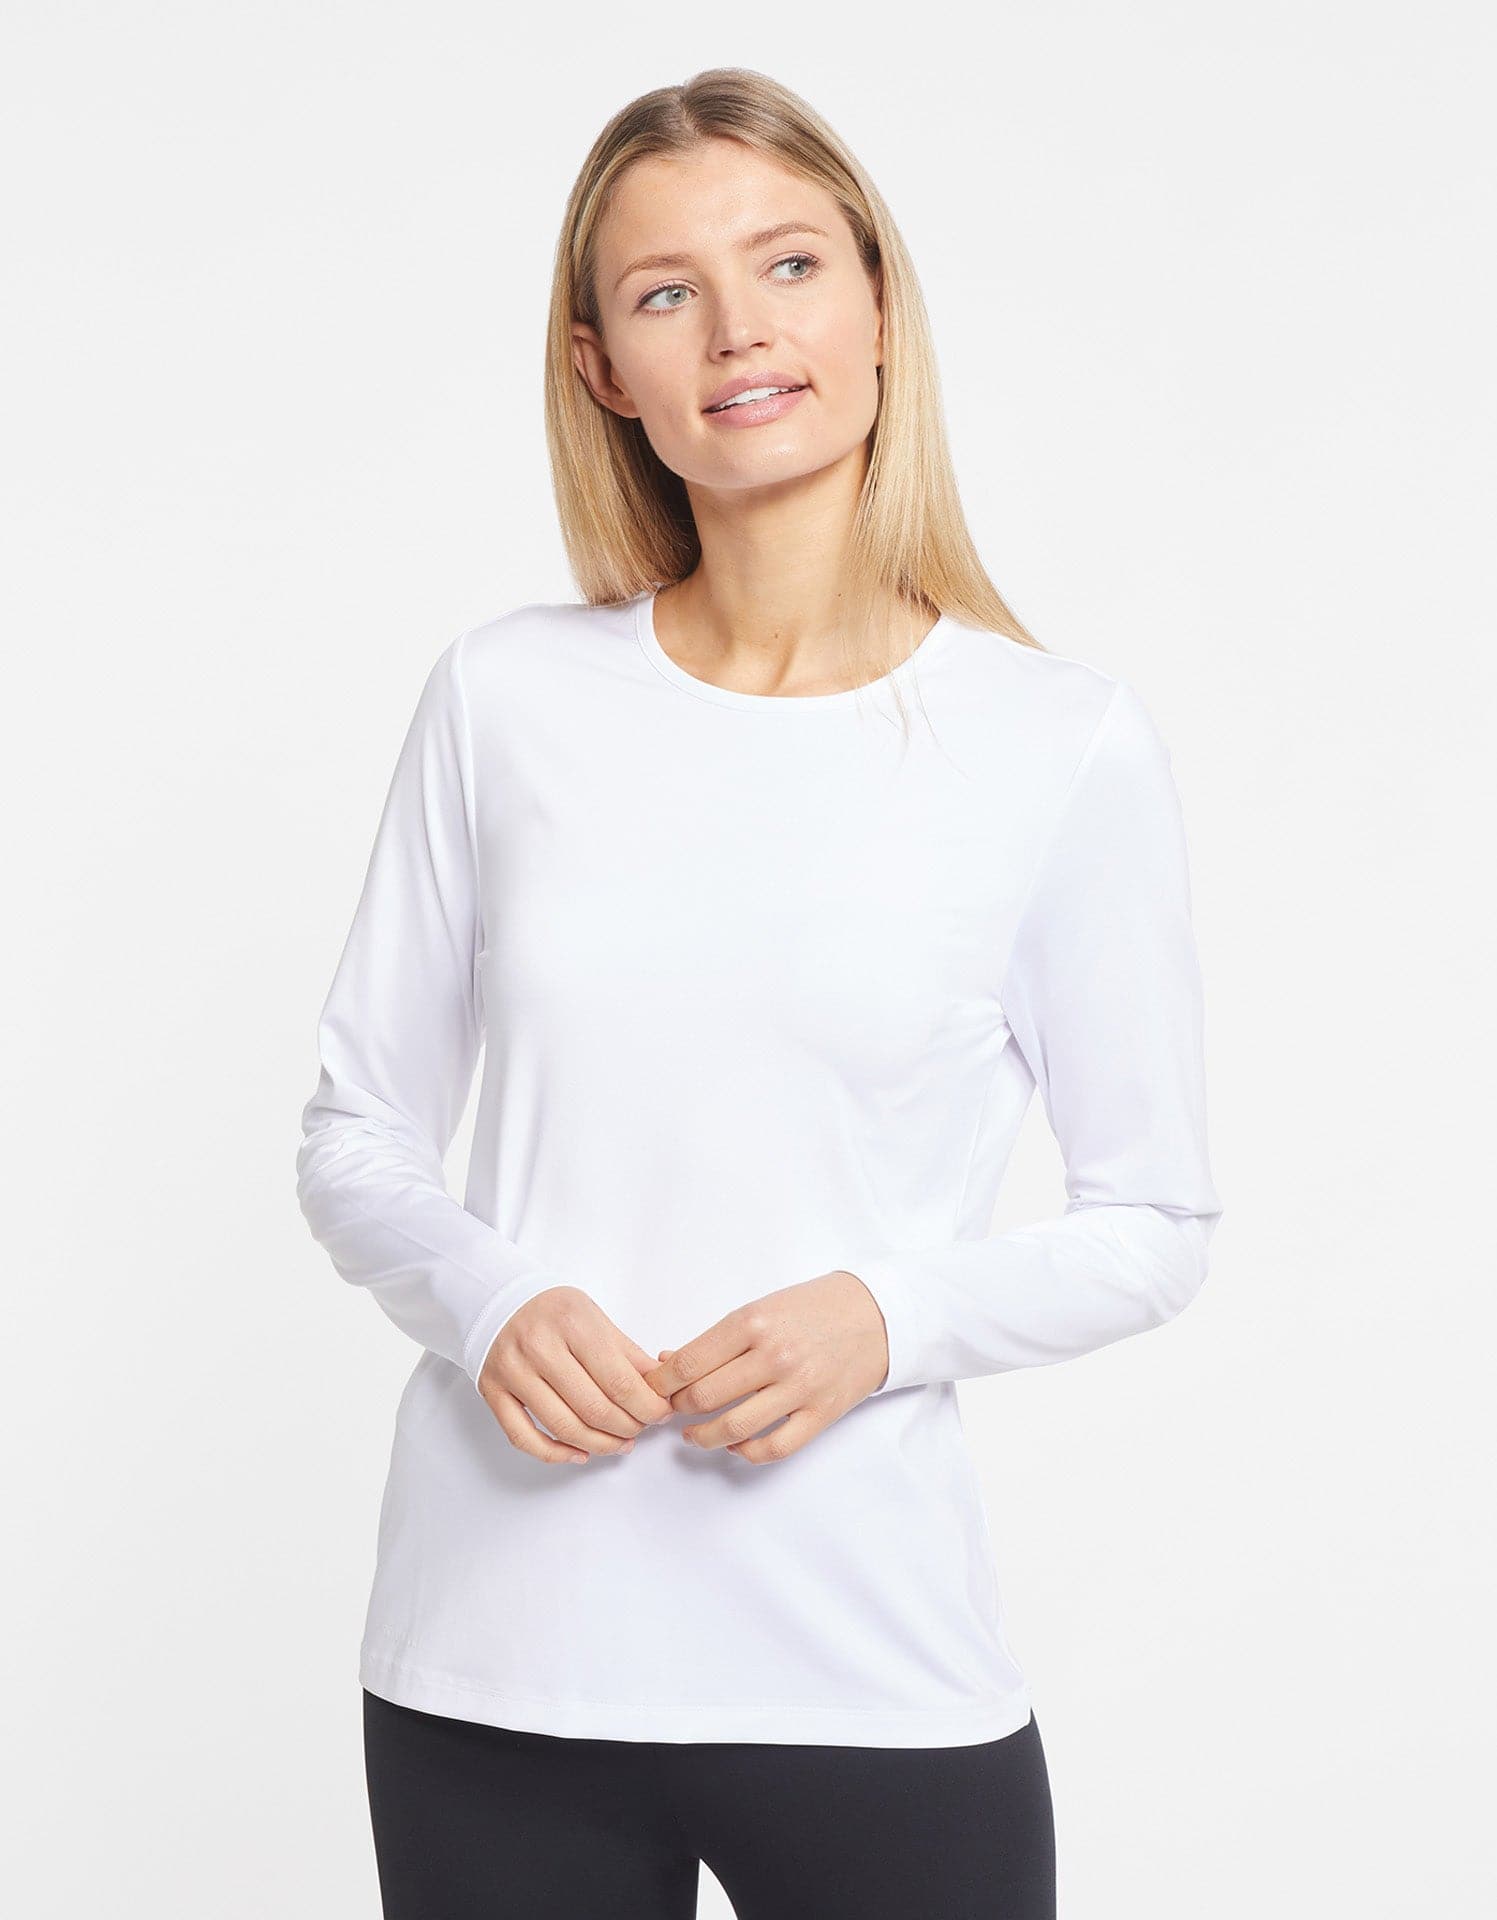 Long Sleeve Workout Shirts for Women,Moisture Wicking Sun Protection Long  Sleeve Athletic T-Shirts for Women Running